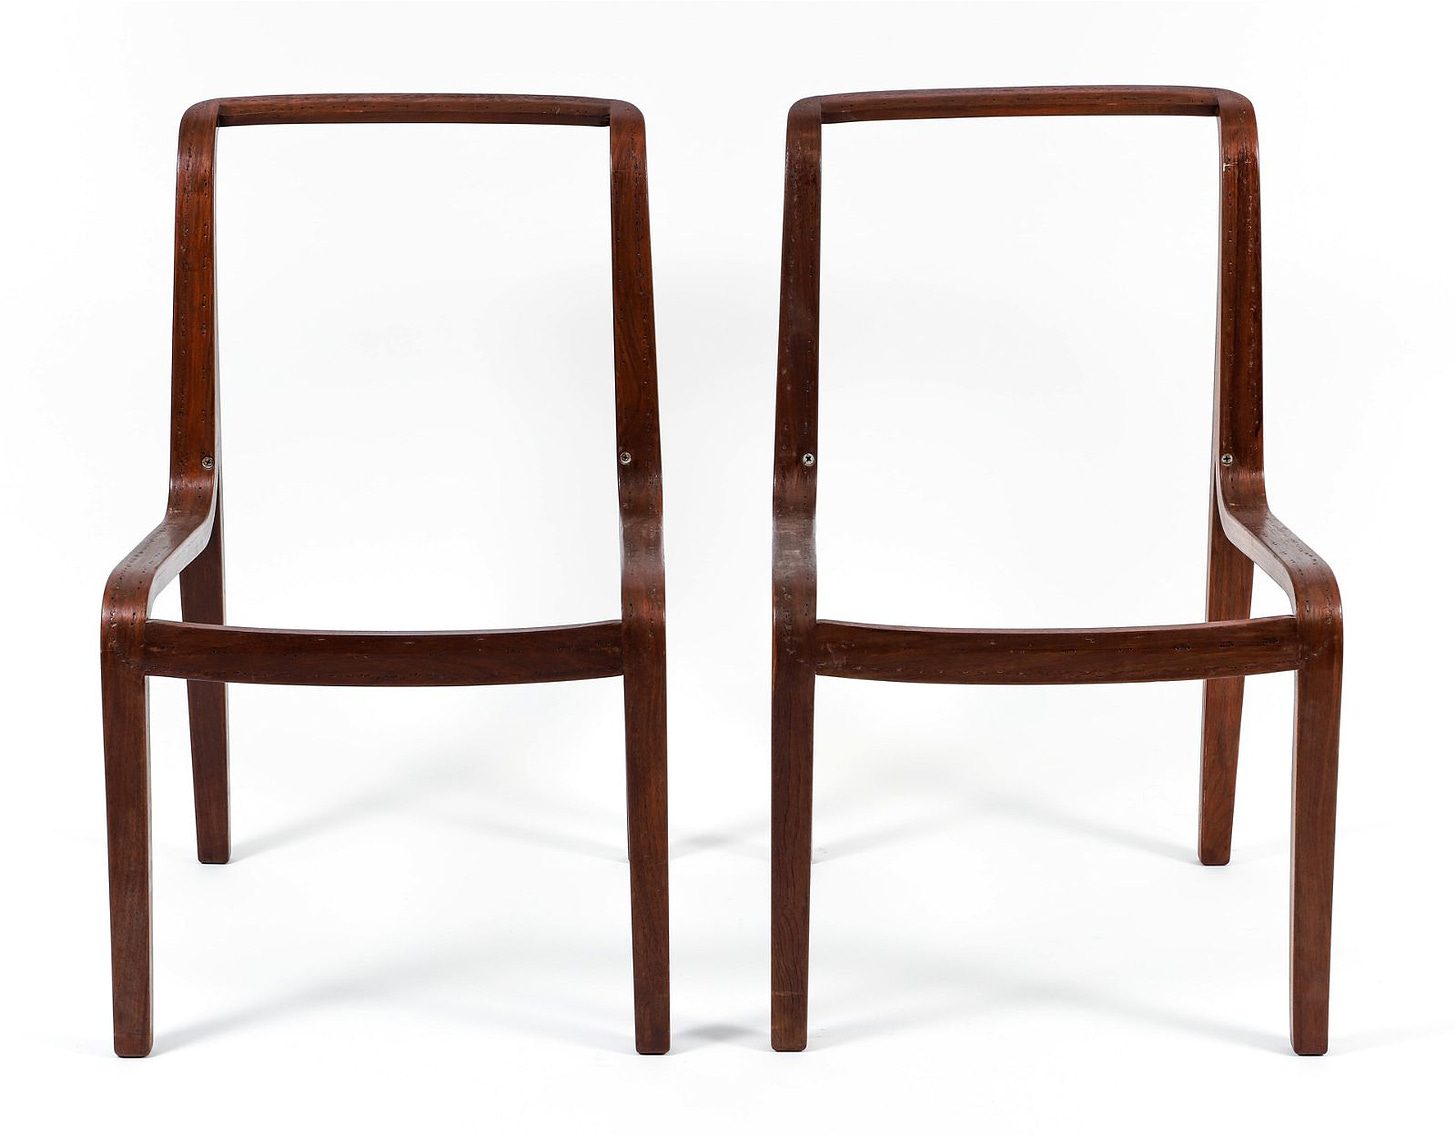 Pair of Bill Stephens for Knoll Chair Frames